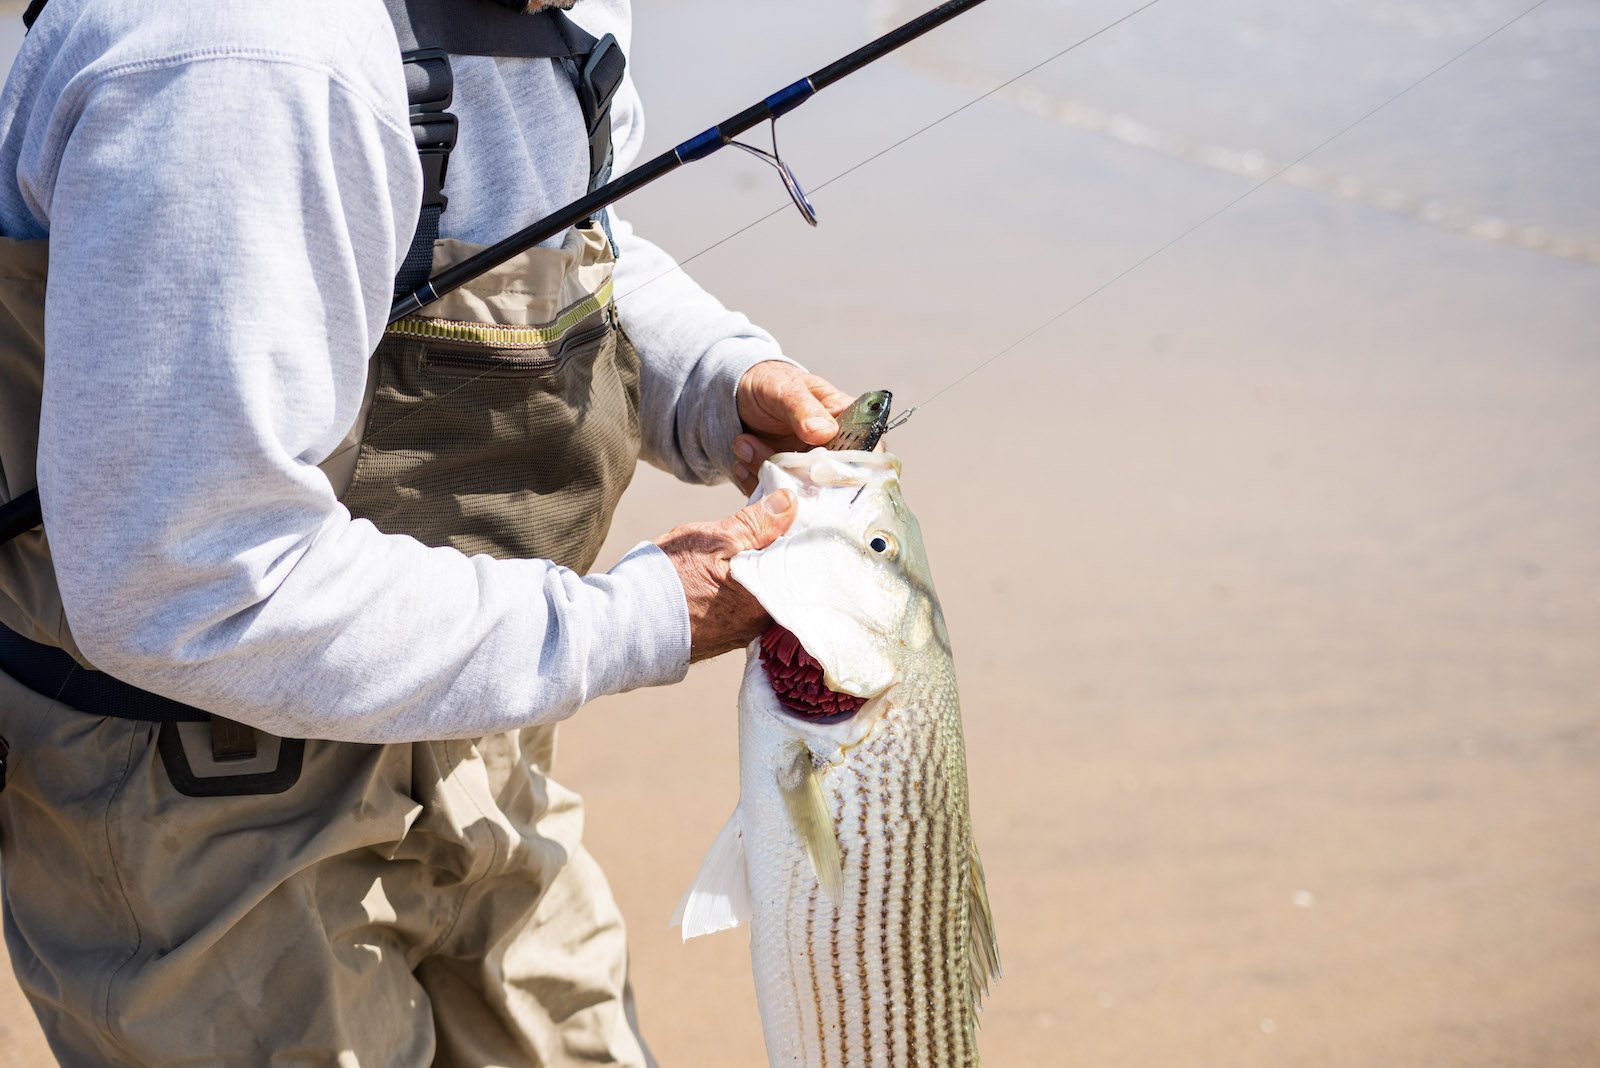 Breakthroughs Position Striped Bass for Commercial Success - North